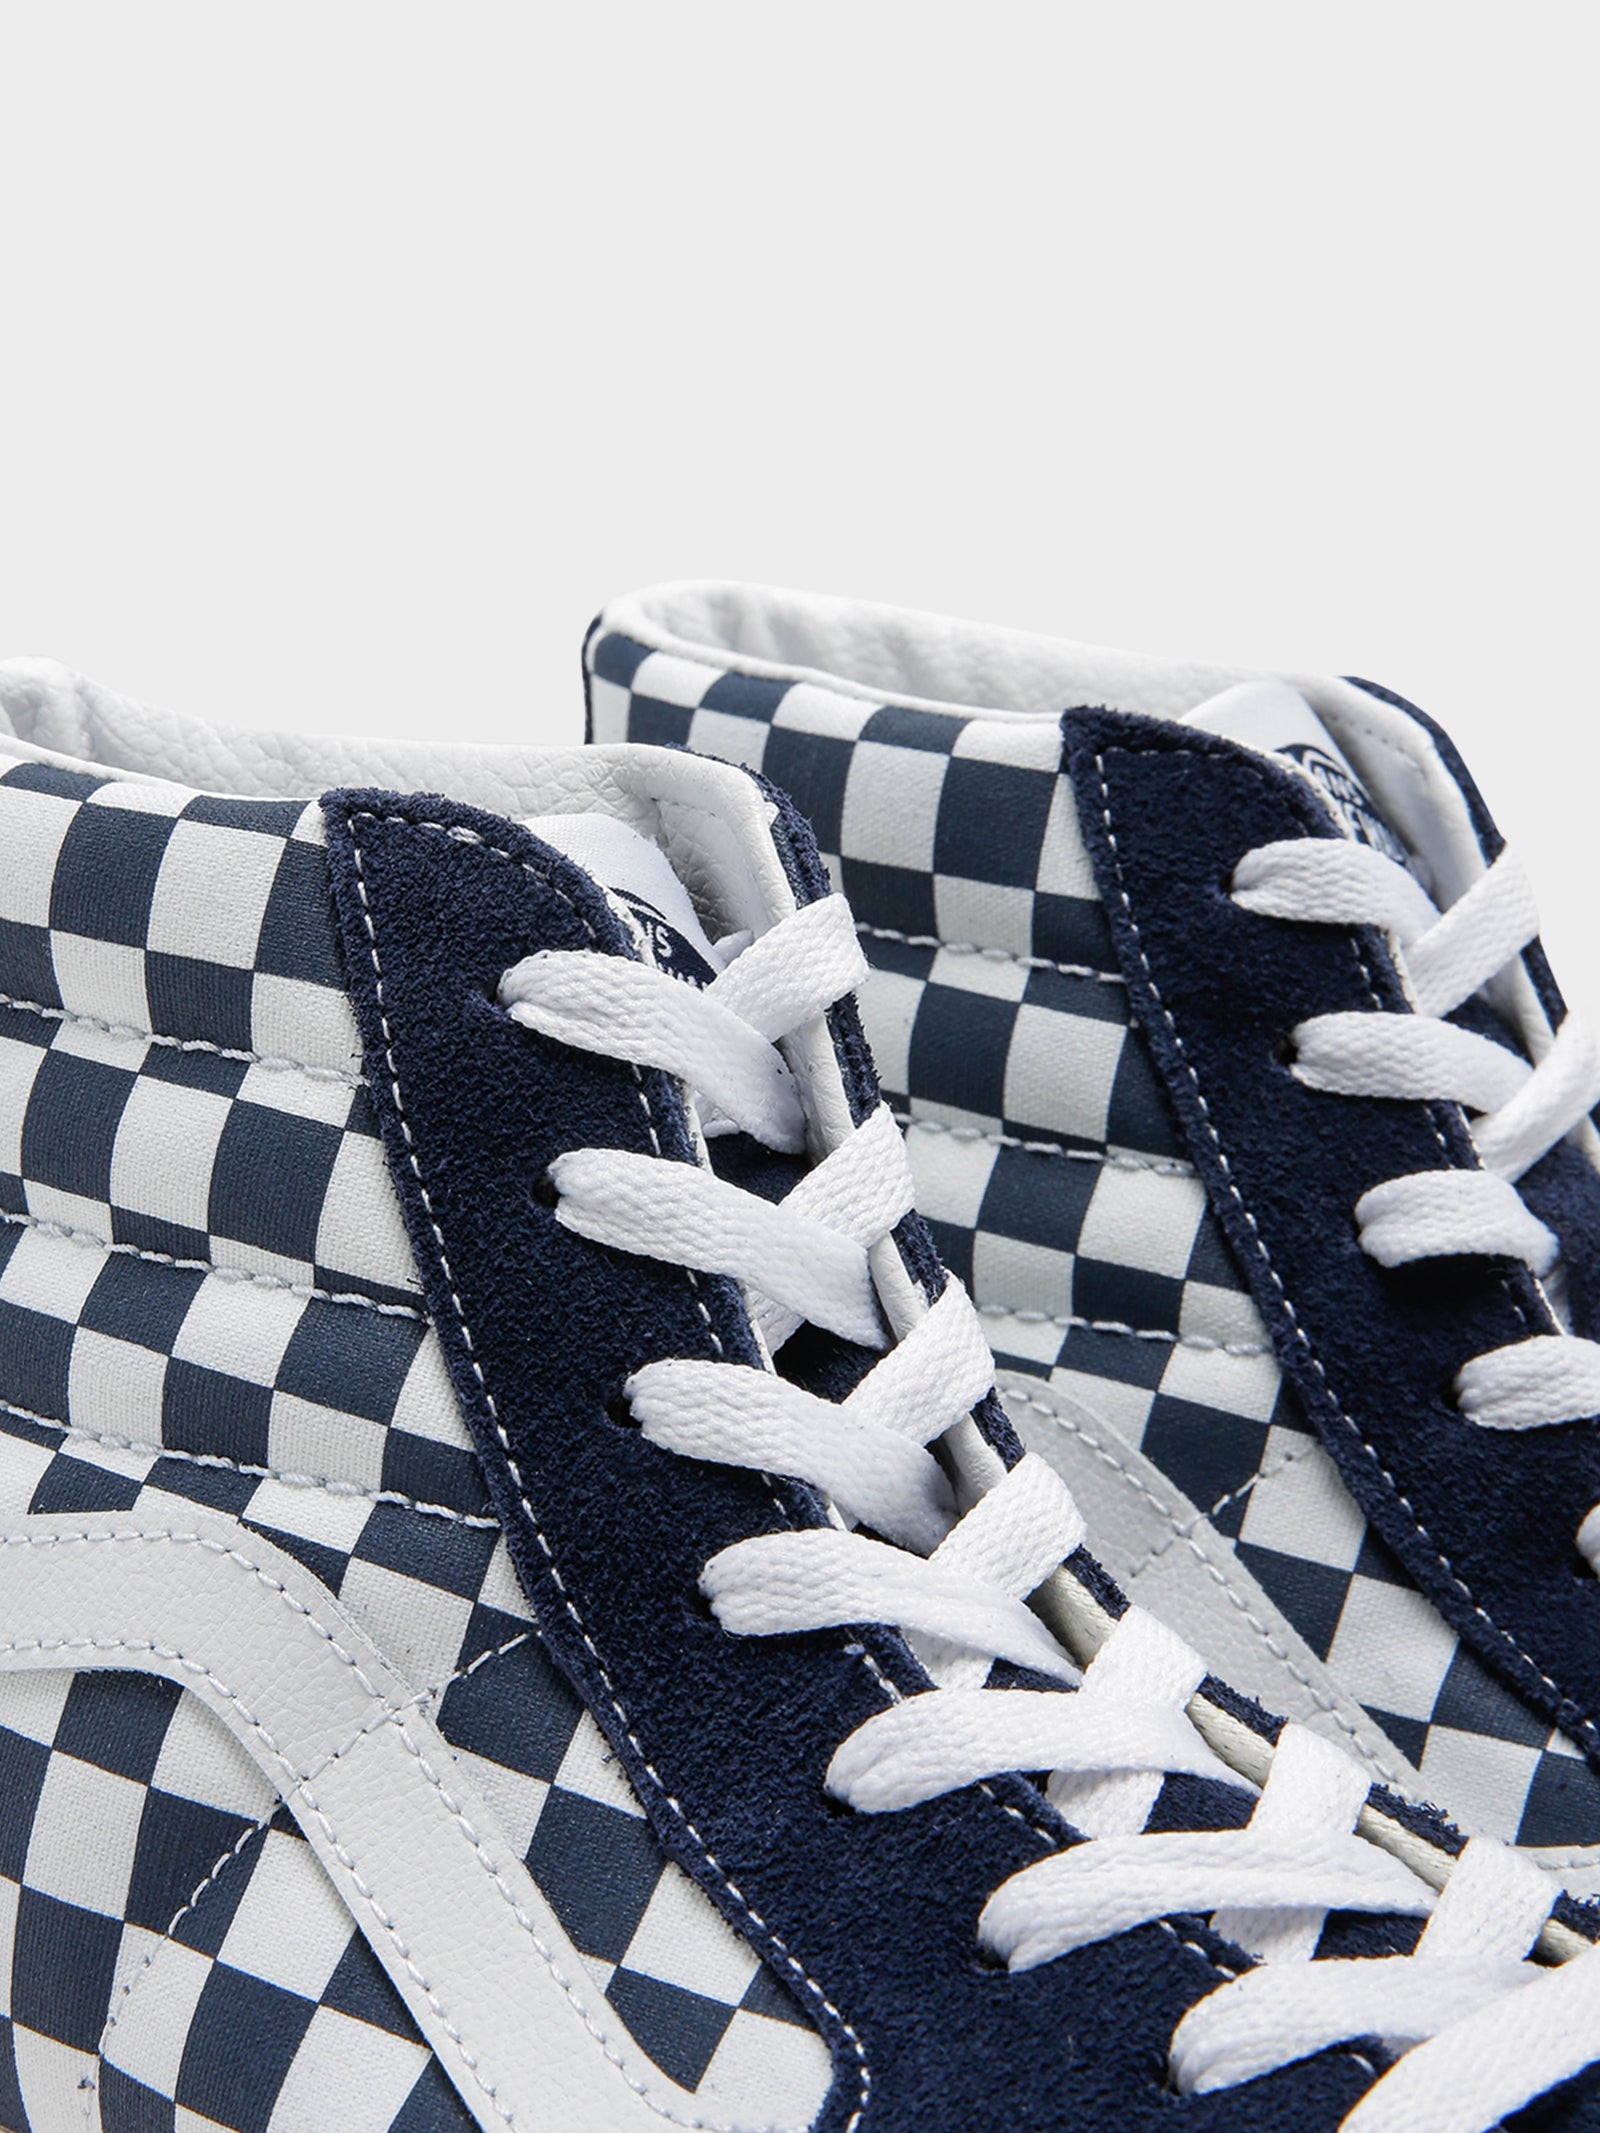 Unisex Sk8 High Top Sneakers in Checkerboard Dress Blues & White